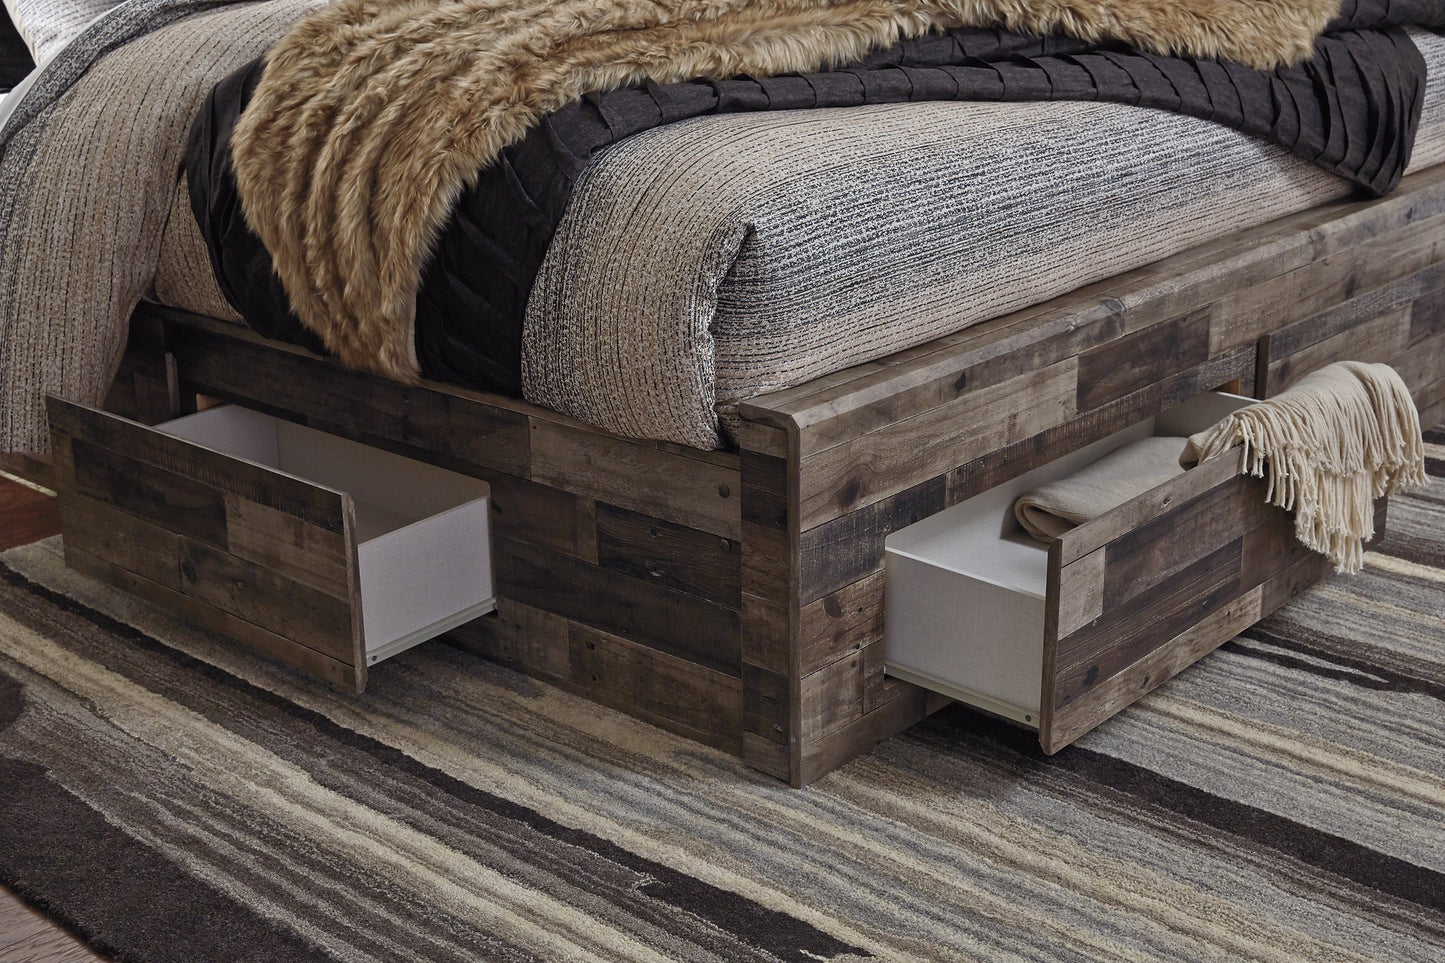 Derekson Queen Panel Bed with 6 Storage Drawers at Walker Mattress and Furniture Locations in Cedar Park and Belton TX.